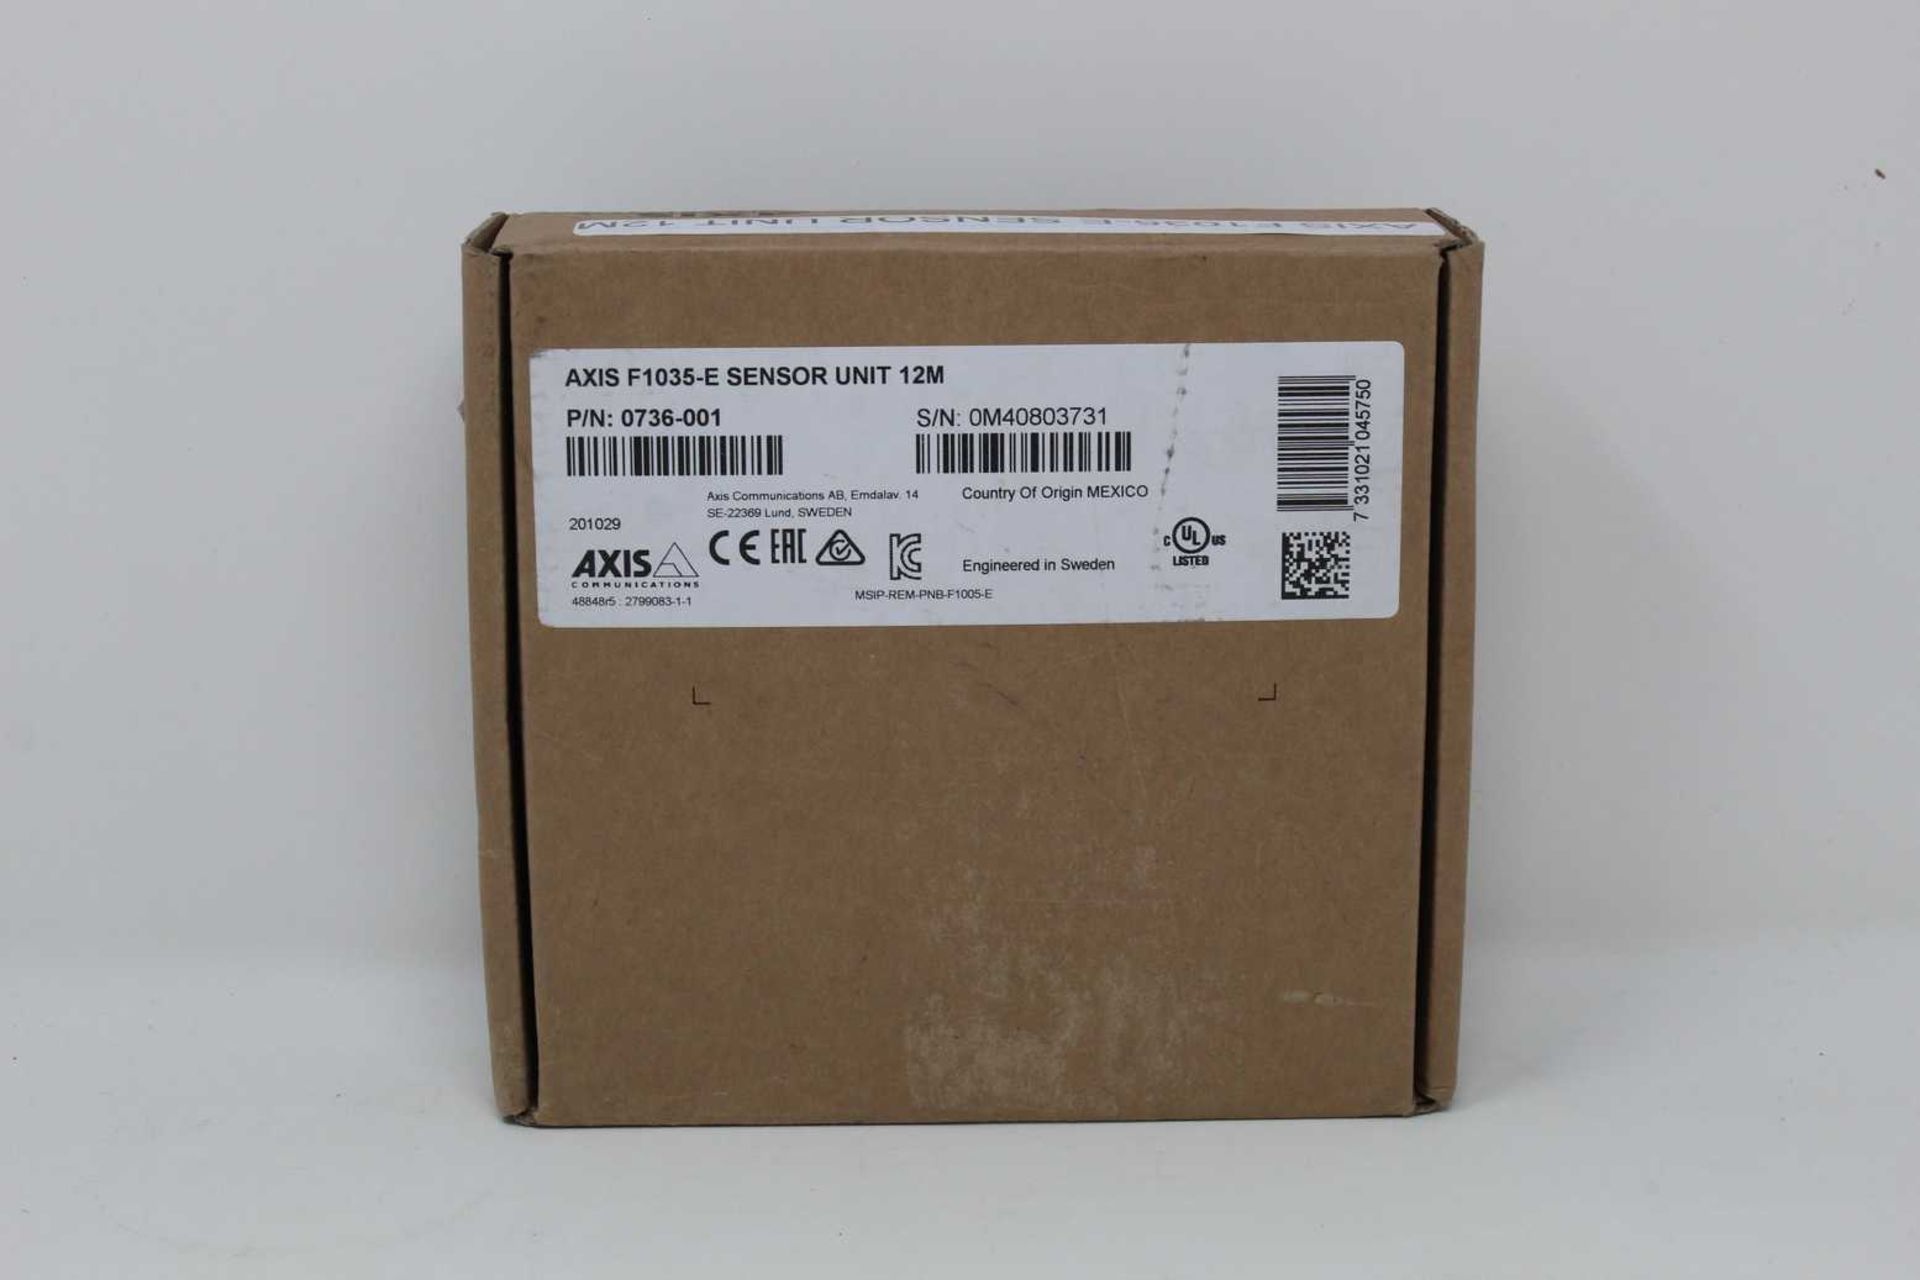 A boxed as new Axis Communications F1035-E Sensor Unit with 12M Cable (P/N: 0736-001) (Box opened).